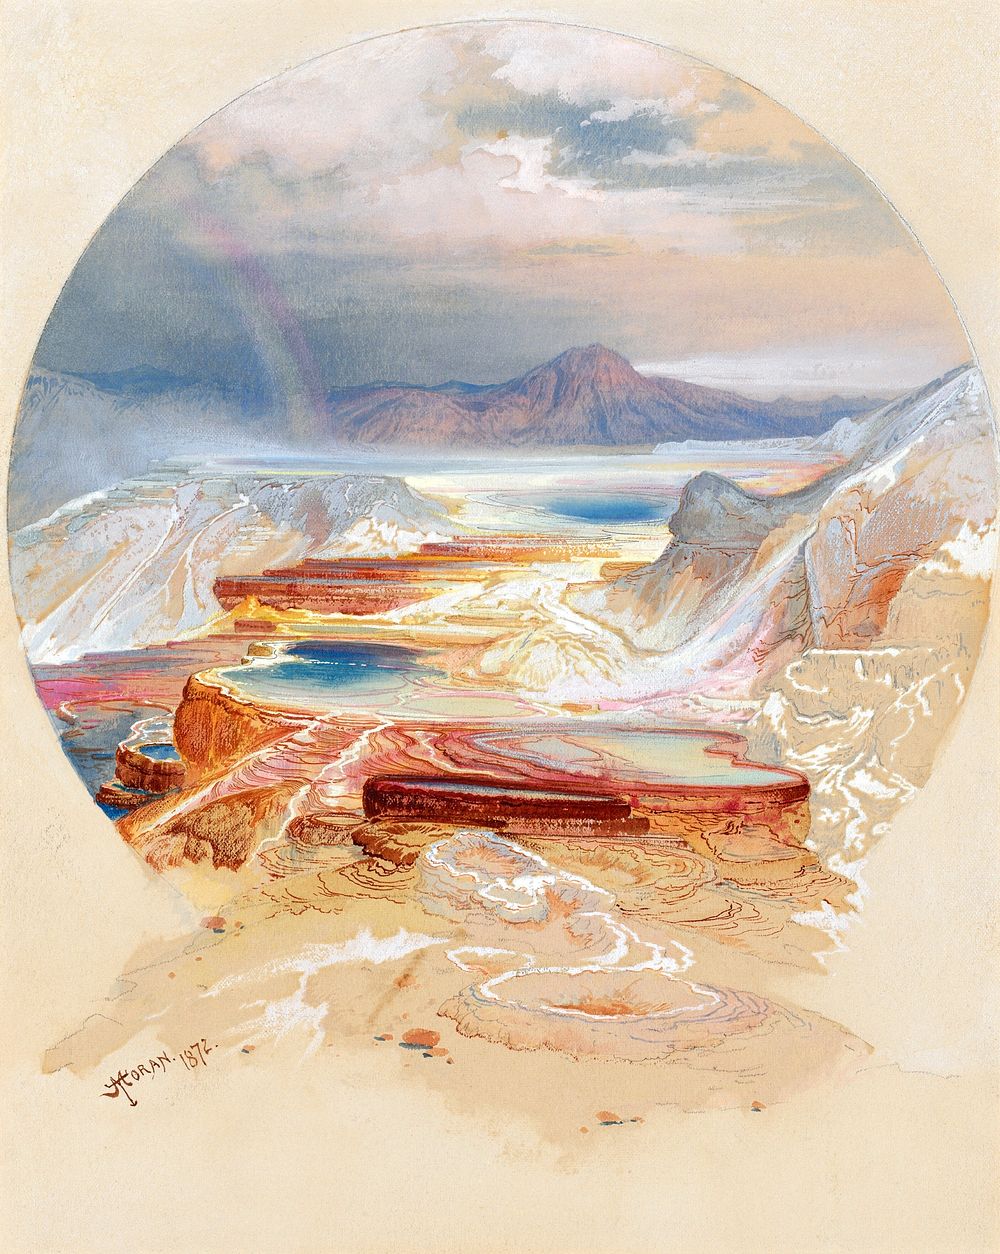 Minerva Terrace, Yellowstone (1872) watercolor and gouache by Thomas Moran. Original public domain image from the National…